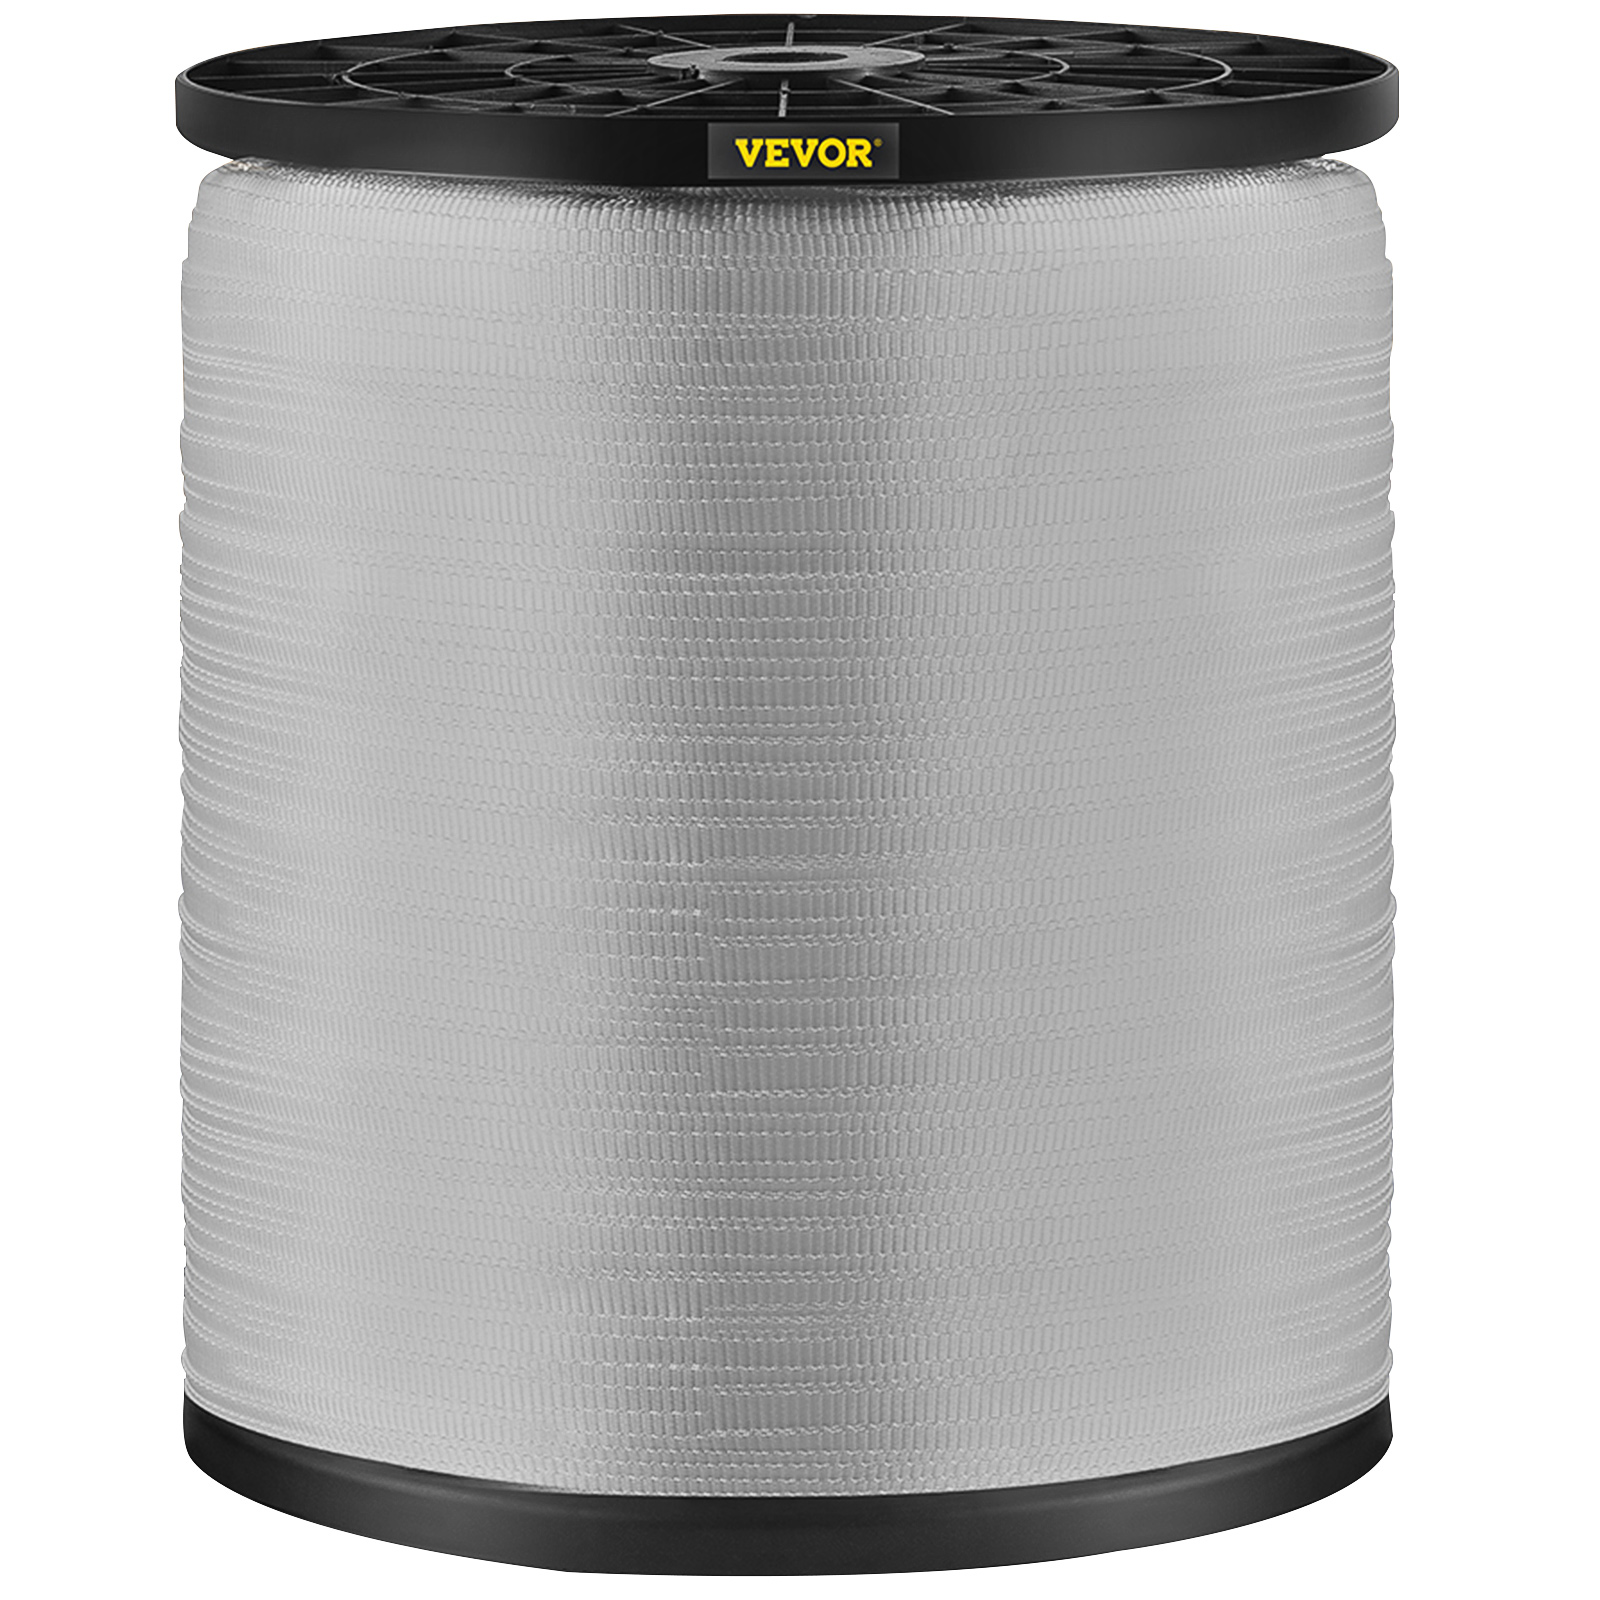 Vevor 3/4" X 528' Polyester Pull Tape Flat Rope 2500 Lbs Tensile Capacity от Vevor Many GEOs